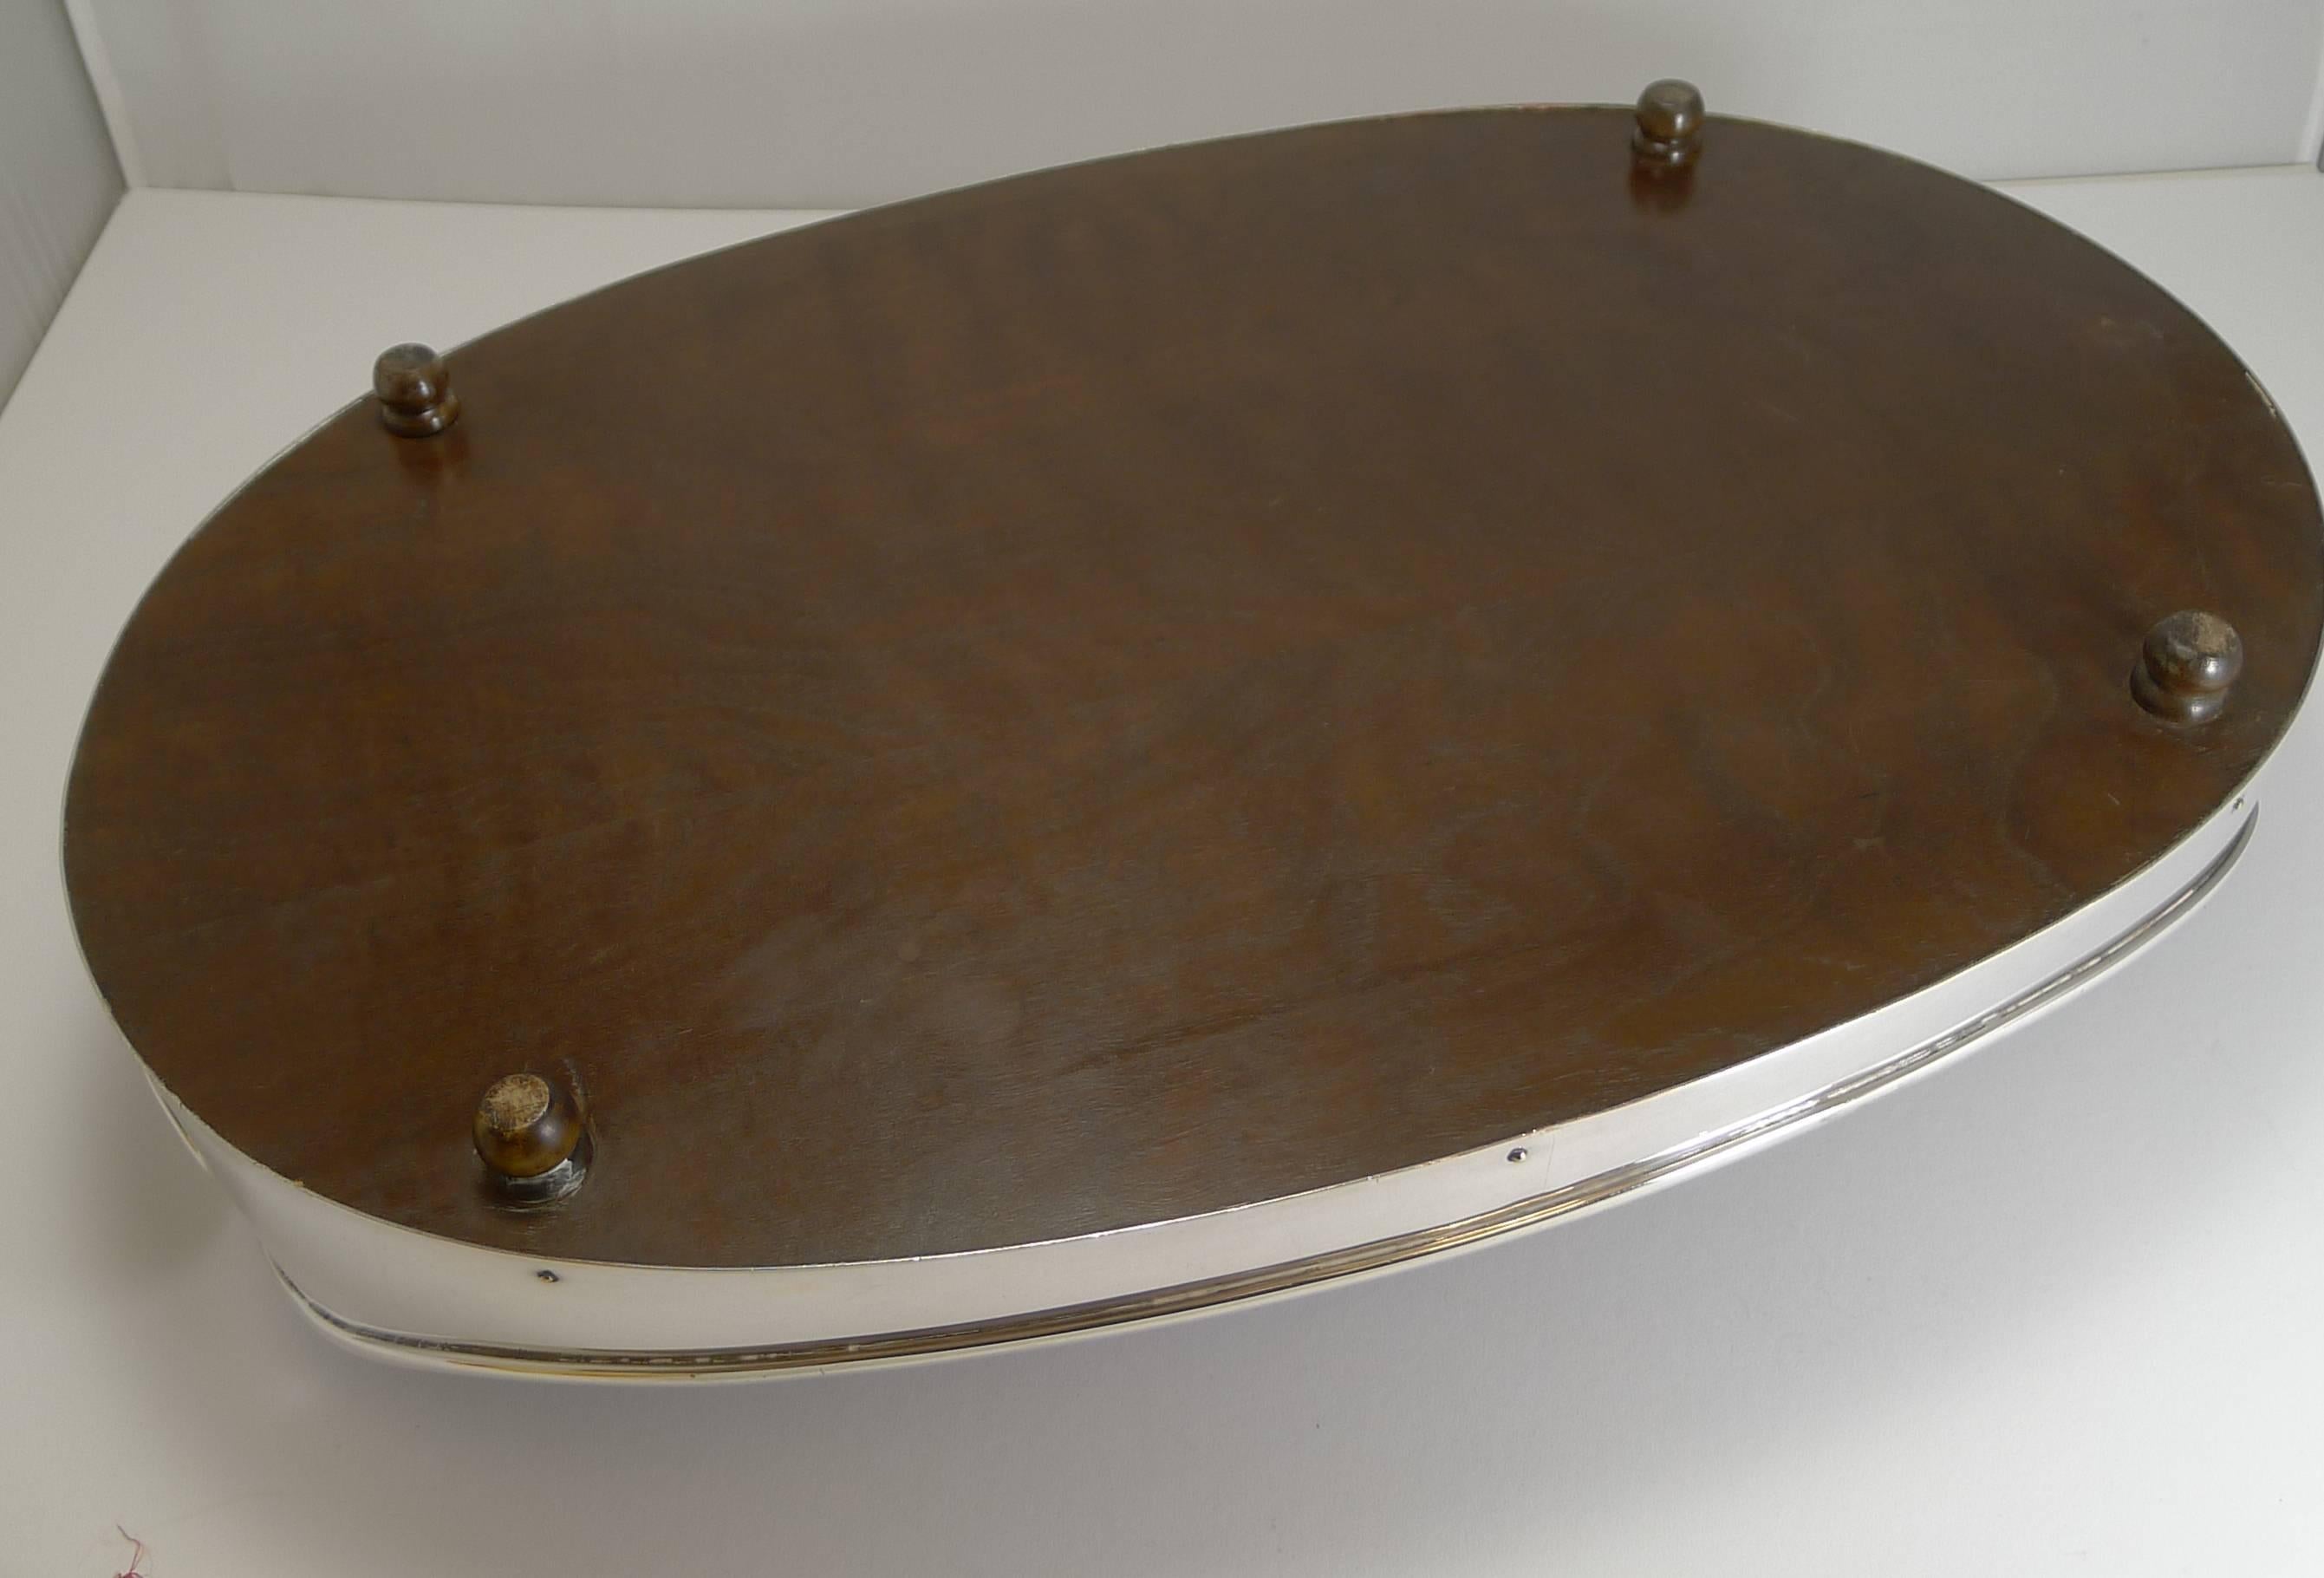 Edwardian Grand Inlaid Tray with Fabulous Silver Plated Gallery, circa 1900